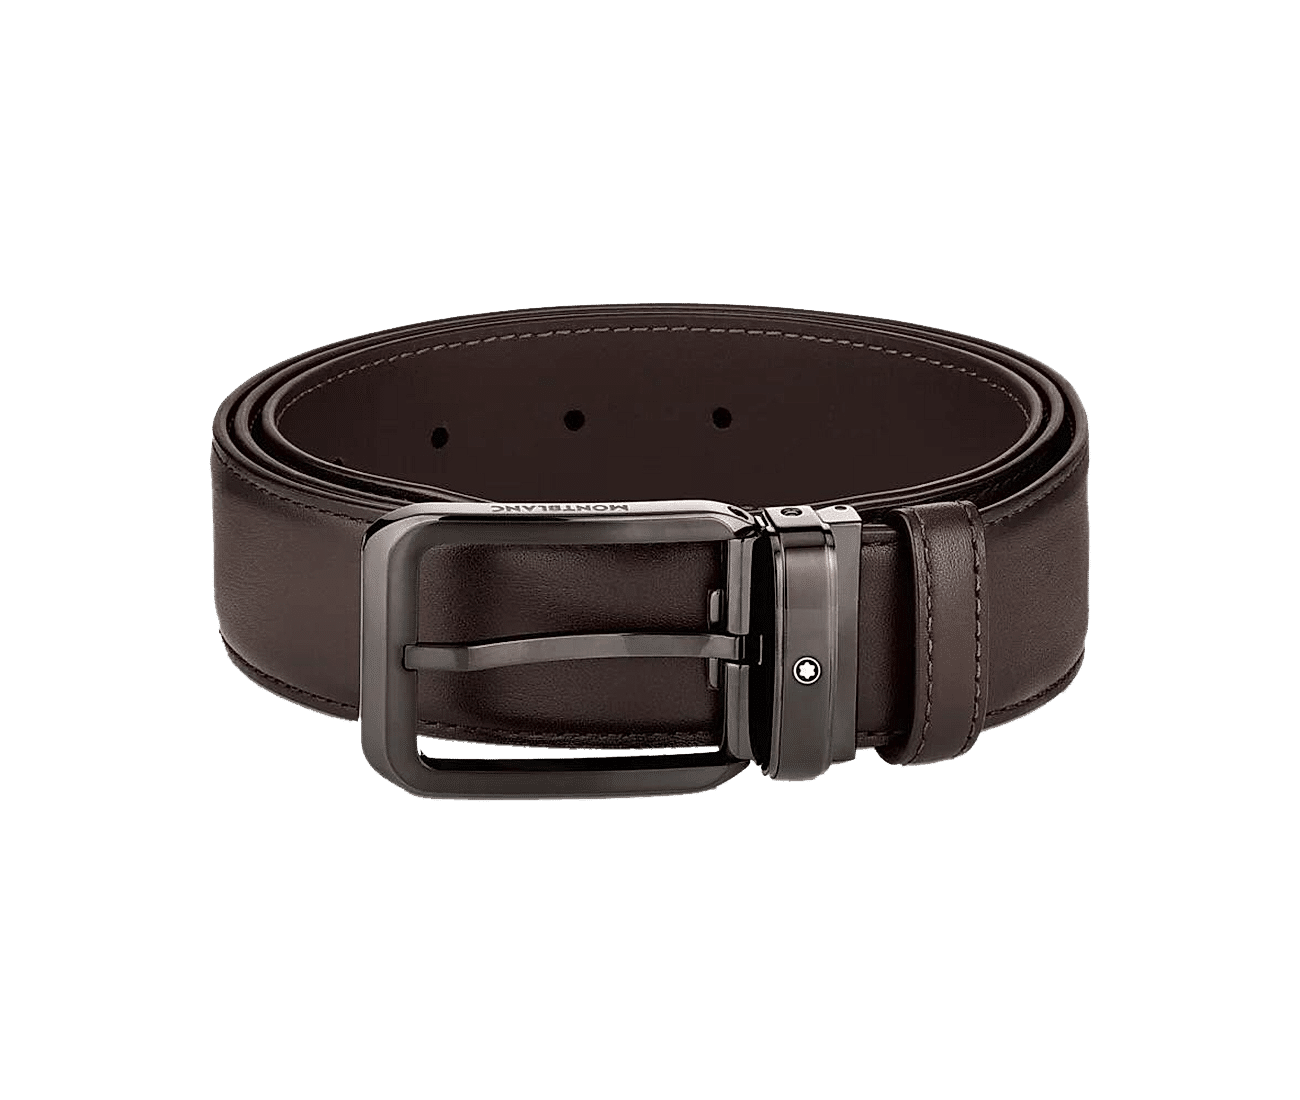 Shaded brown 35 mm leather belt